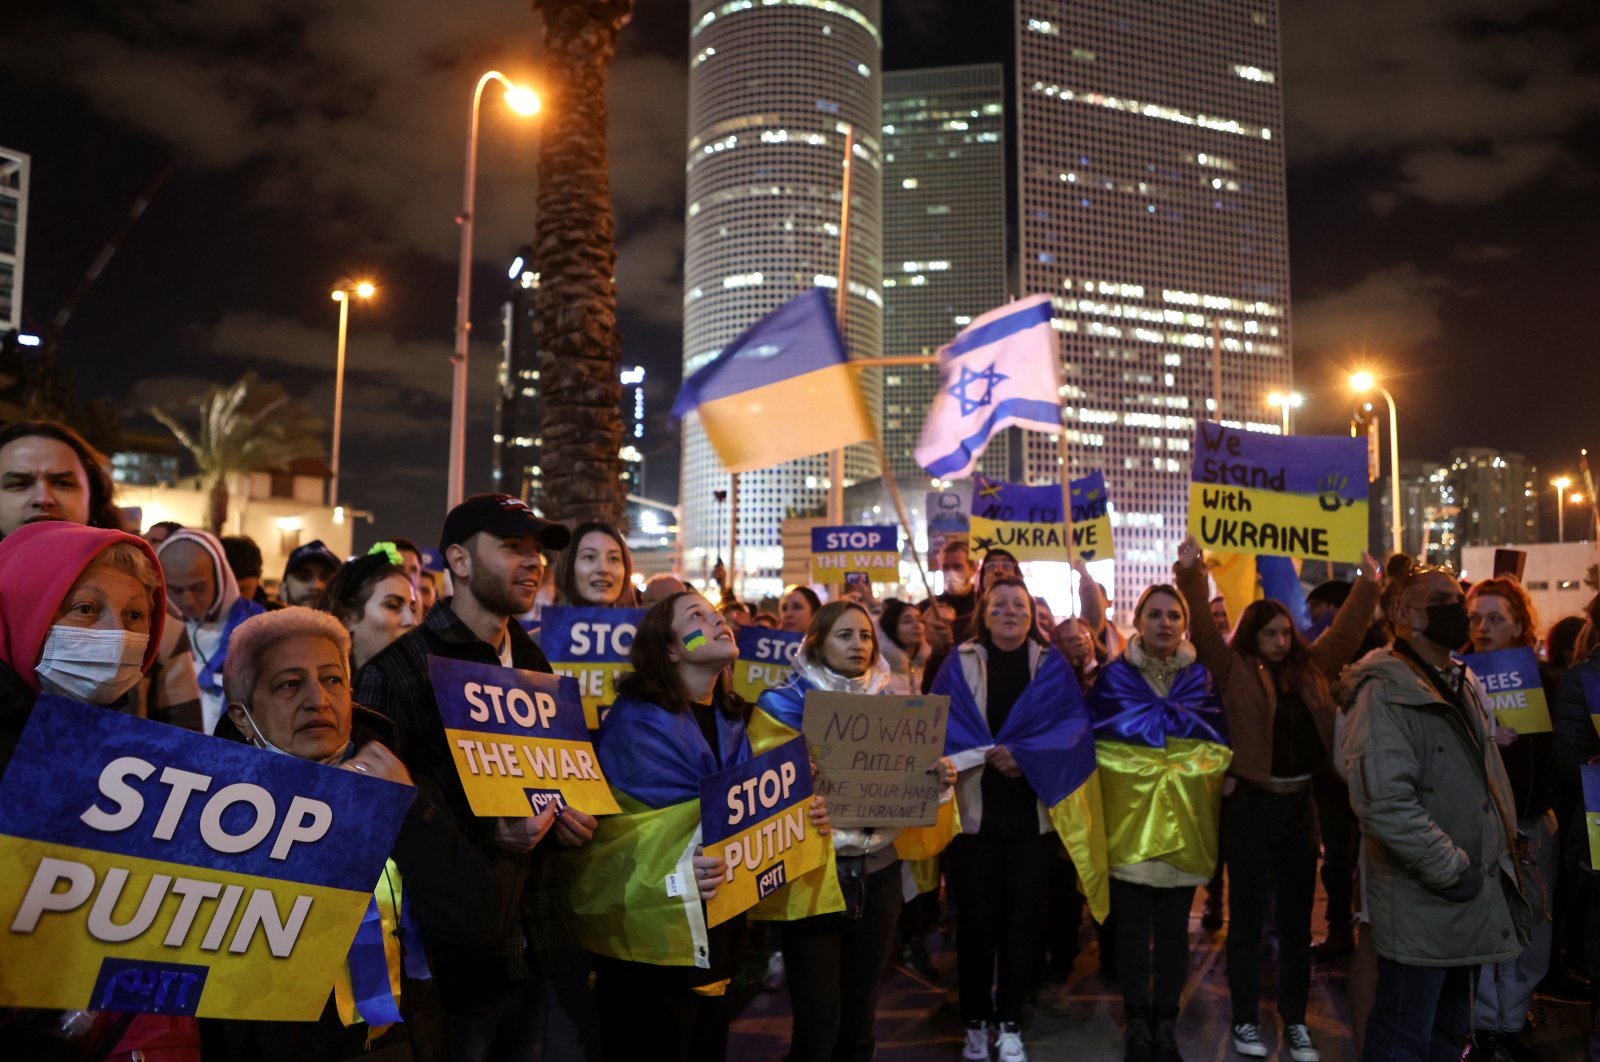 Protestors hold signs at a demonstration against the Russian military invasion of Ukraine, calling on Russian President Vladimir Putin to stop the war, in Tel Aviv, Israel, March 12, 2022. (REUTERS Photo)